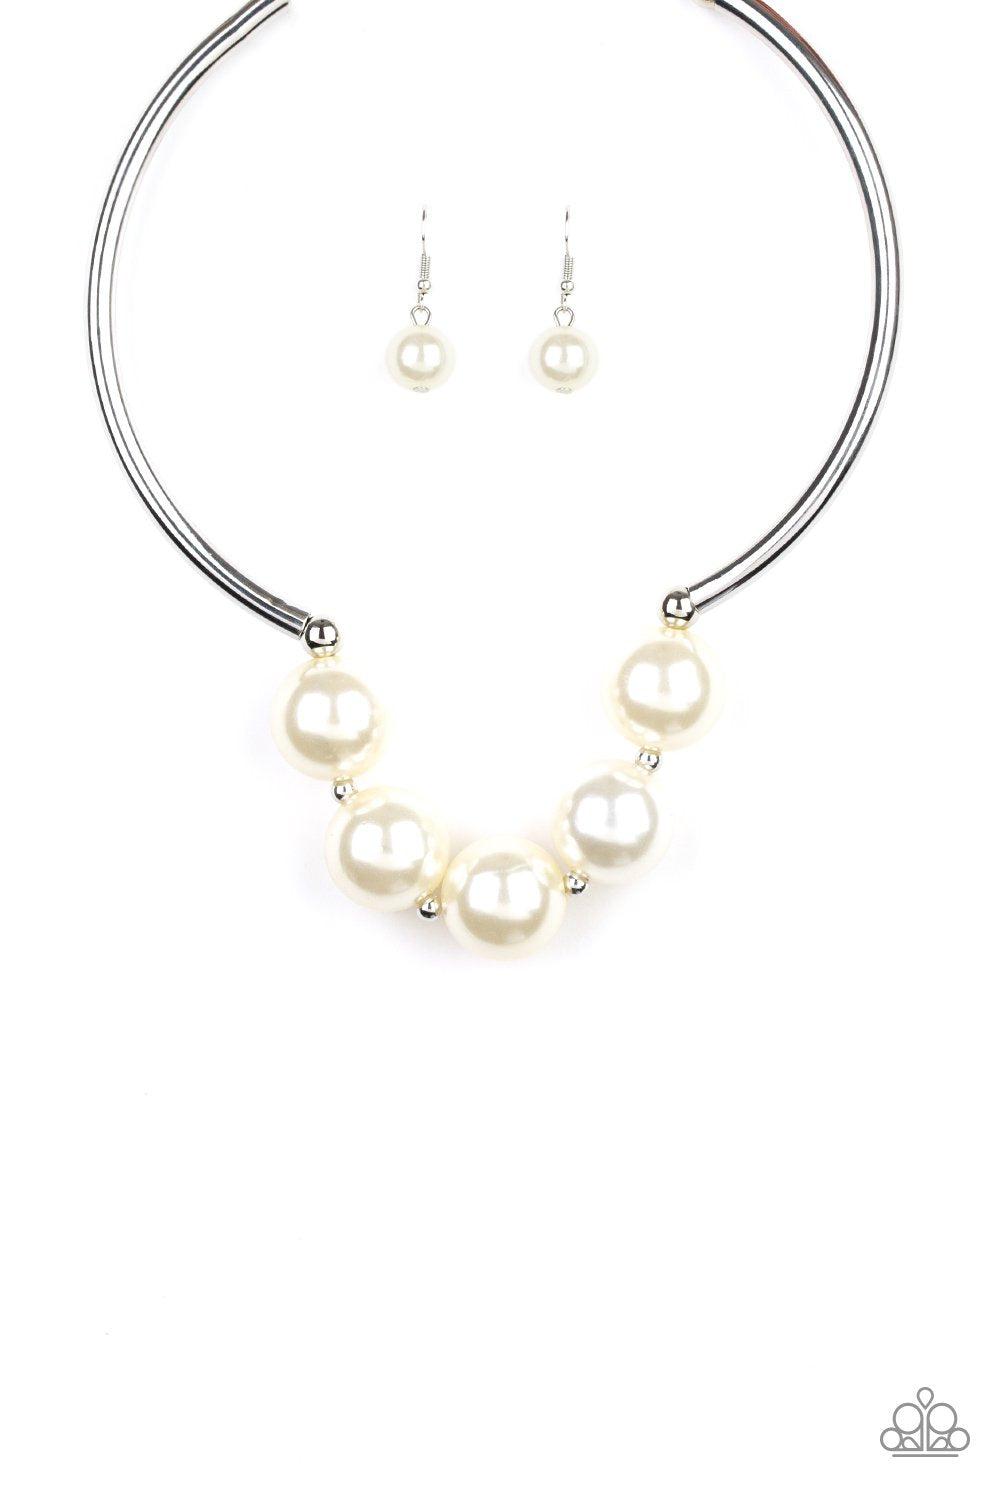 Welcome To Wall Street White Pearl Necklace and matching Earrings - Paparazzi Accessories-CarasShop.com - $5 Jewelry by Cara Jewels